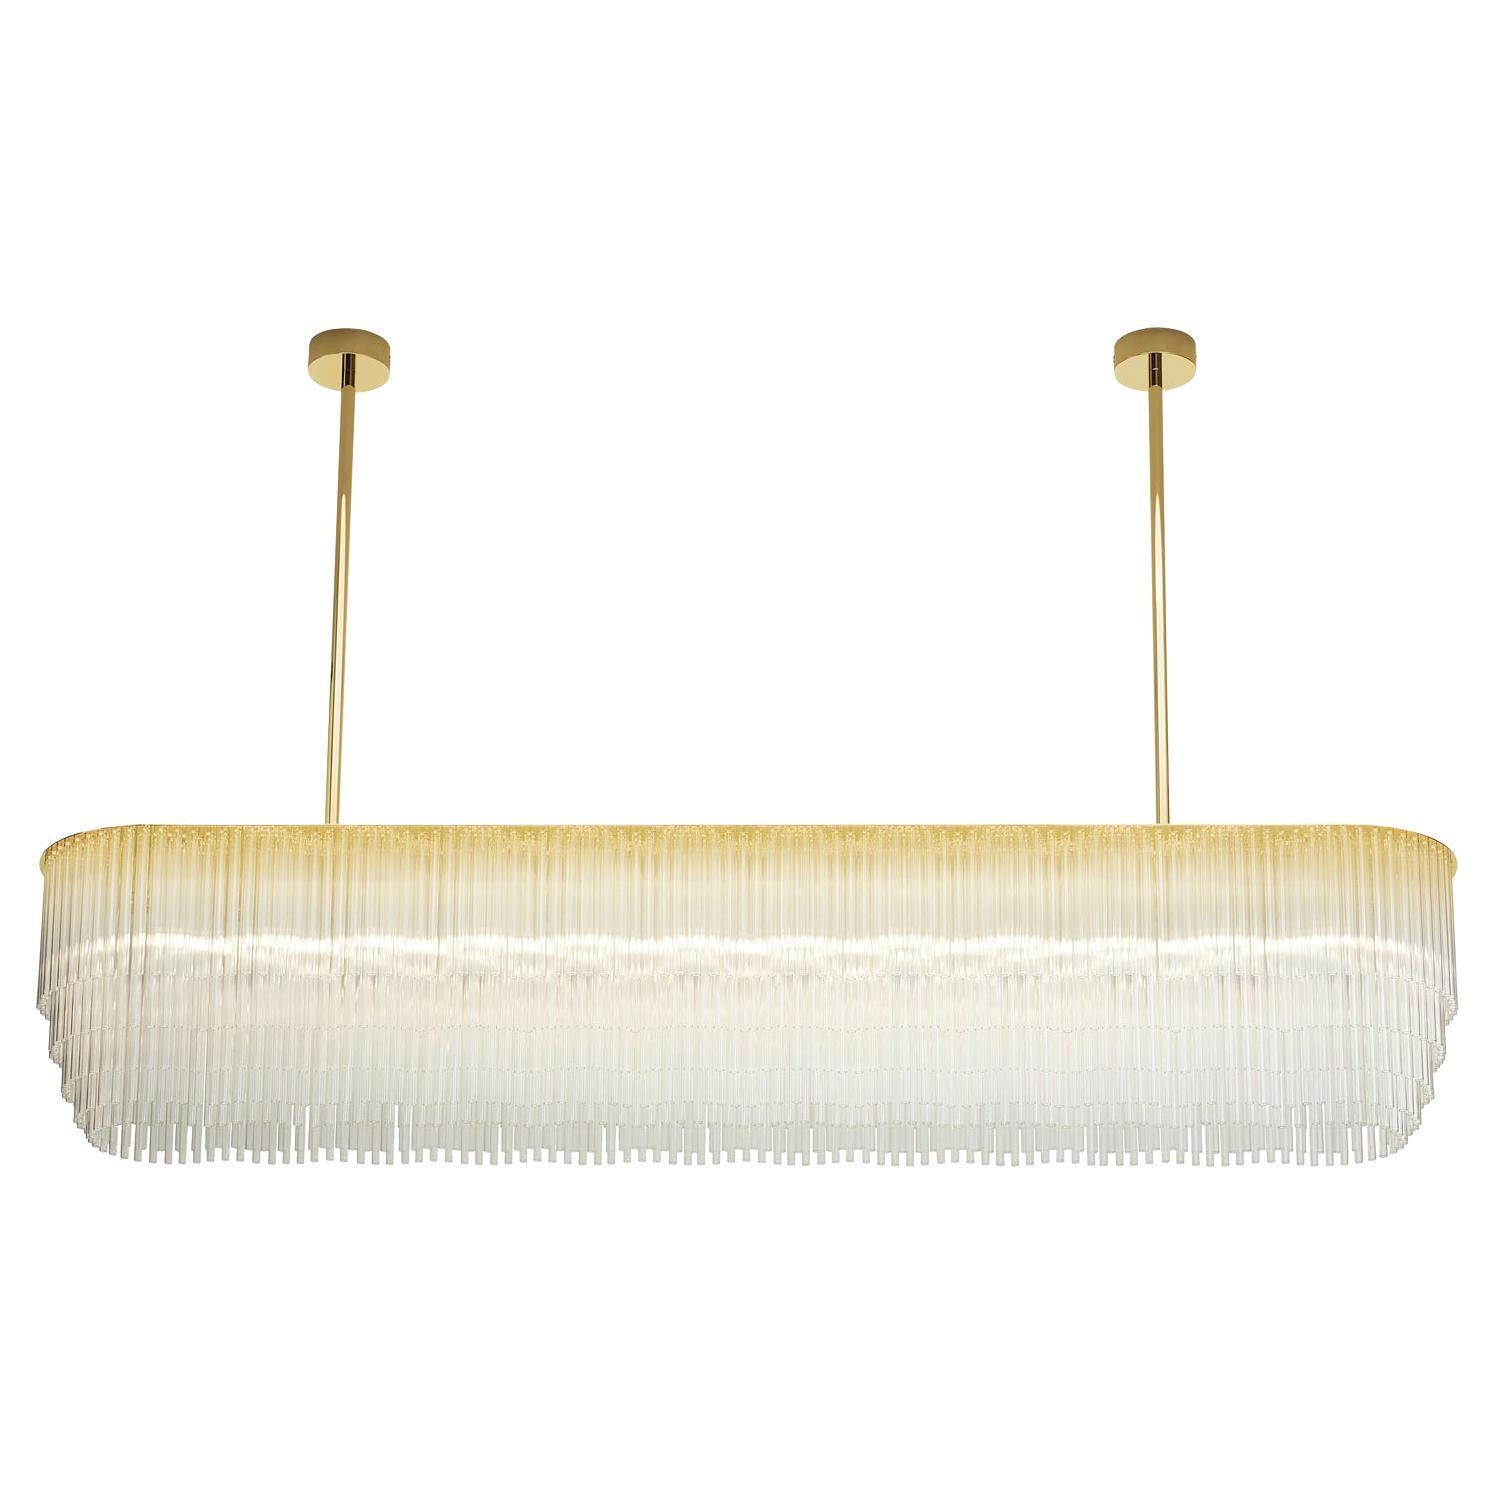 Linear Chandelier 1588mm / 68.25" in Polished Brass with Tiered Glass Profile For Sale